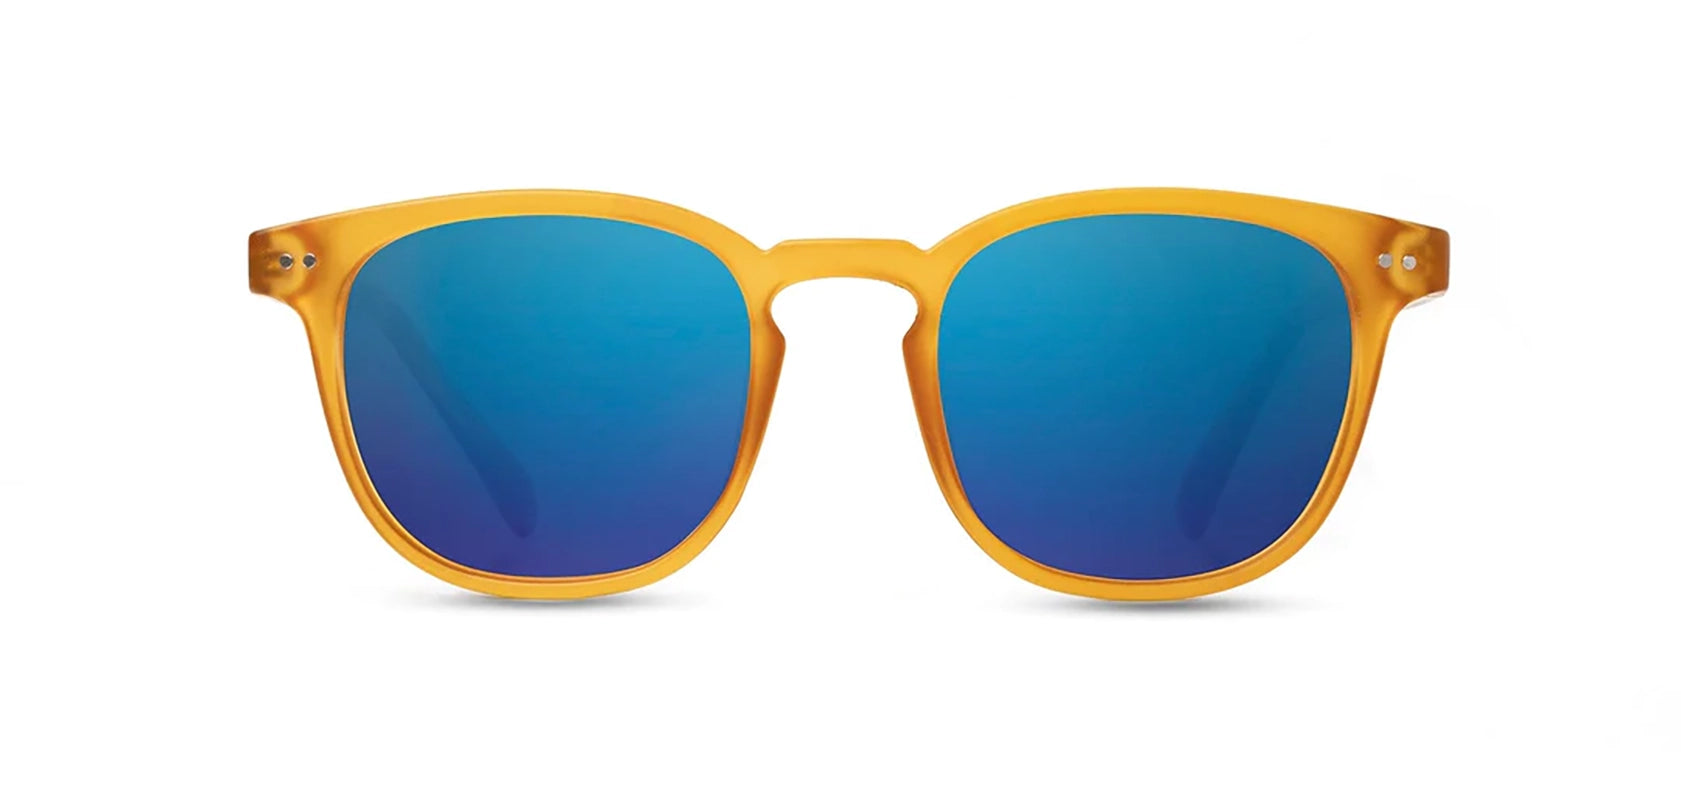 Camp Topo Sunglasses in Matte Orange / Walnut Frames with HD+ Blue Flash polarized lenses, front  view